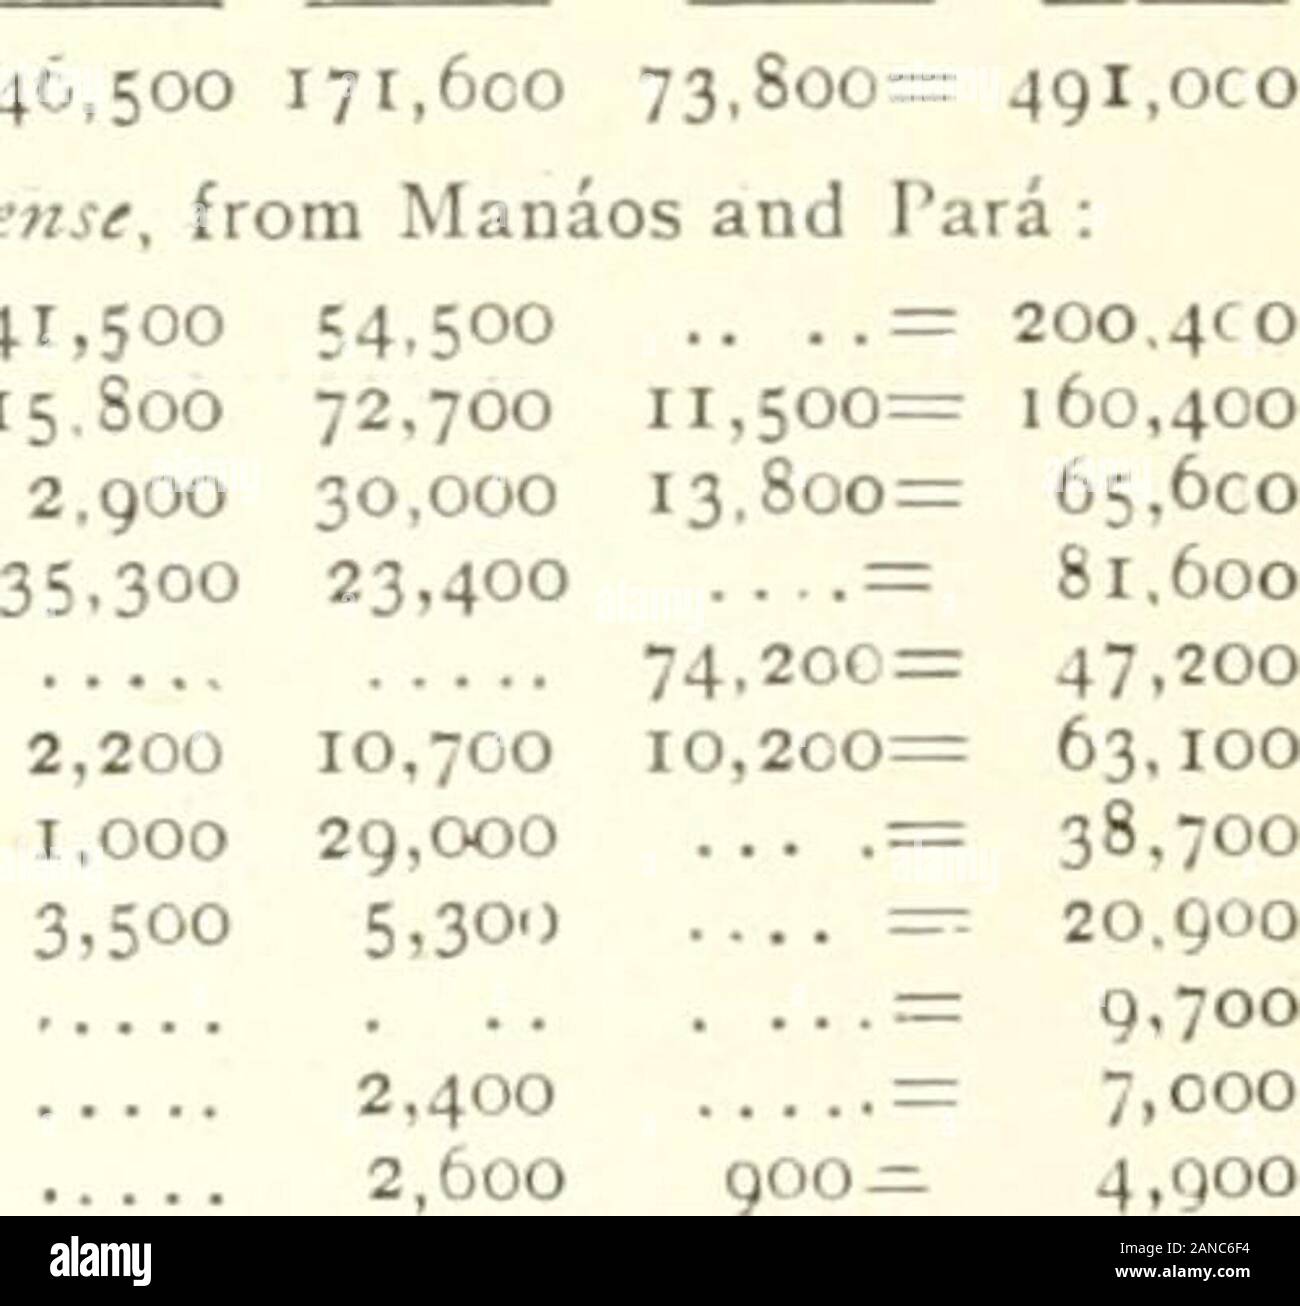 India rubber world . July 3.—By the steamer Benedict, from Manaos and Para :Importers. Fine. Medium. Coarse. Caucho. 1903.2645 A. T. Morse & Co 79,800 New York Commercial Co. 93,600 Poel & Arnold 6,800 William Wright & Co 13,500 United States Rubber Co L. Hagenaers & Co 5,400 9,4002S,goo 5.7001,700 800 71,300 44,200=56,800 17,500=26,100 = 12,000 = 12,100 = 5,400 = Total204,7co196,00038,60027,20012,10011,600 Total 199,100 46,500 171,600 73,800= July 13.—By the steamer Maranhcnsc, from Manaos and New York Commercial Co. 104 400 41,500 A. T.Morse & Co 60.400 15.S00 Poel & Arnold 18,900 G. Amsinck Stock Photo